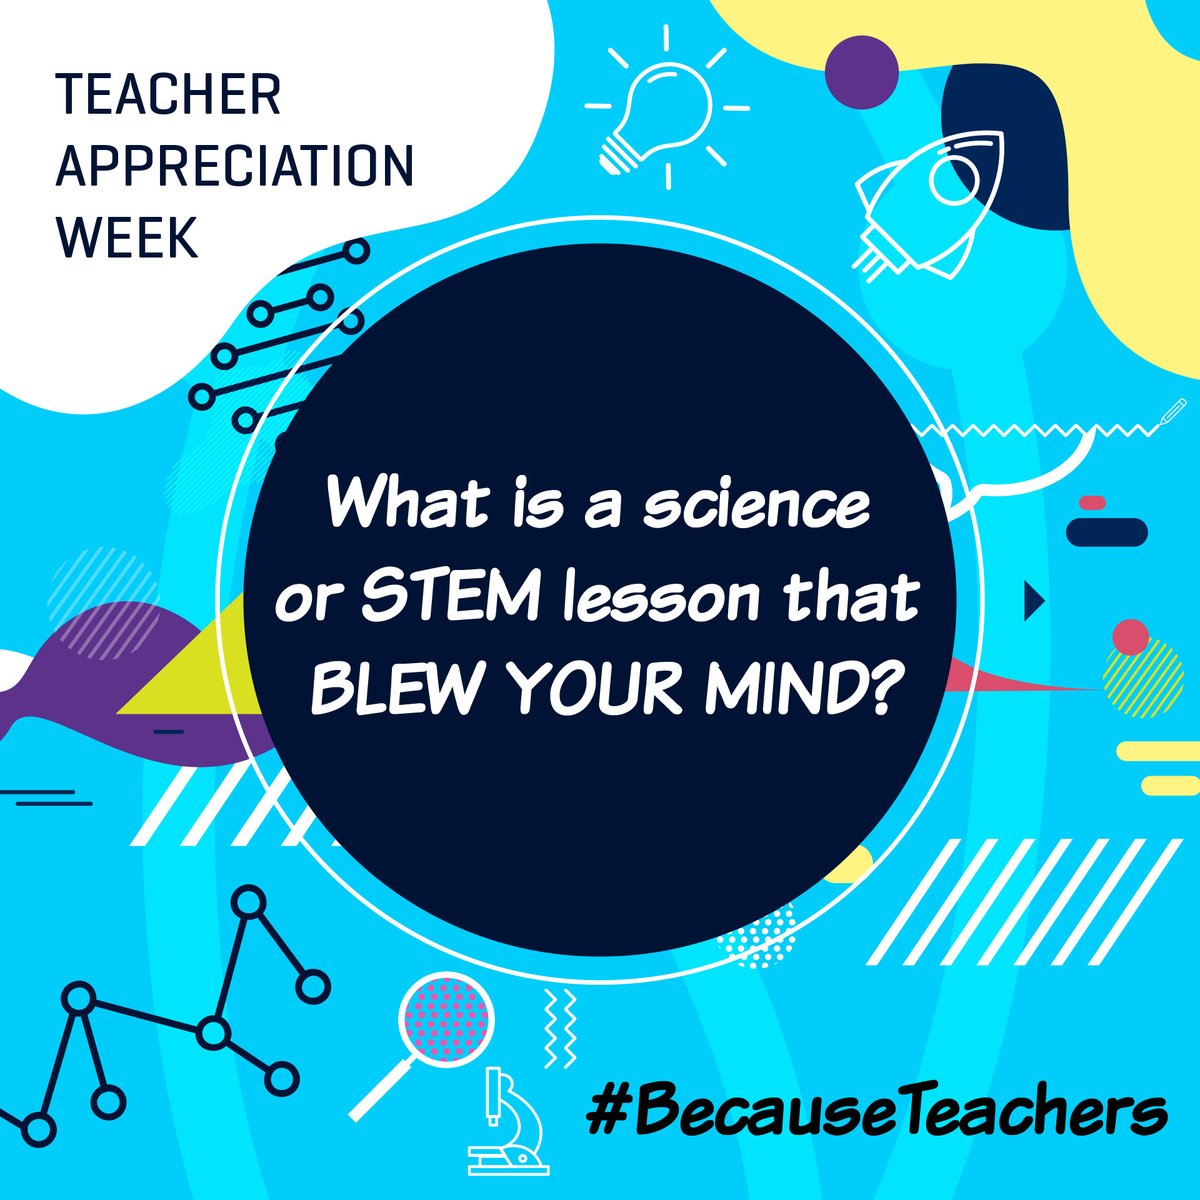 Happy #TeacherAppreciationWeek! What is a science or STEM lesson that BLEW YOUR MIND and has stuck with you? Have you used it in your adult life? #BecauseTeachers #NSTA